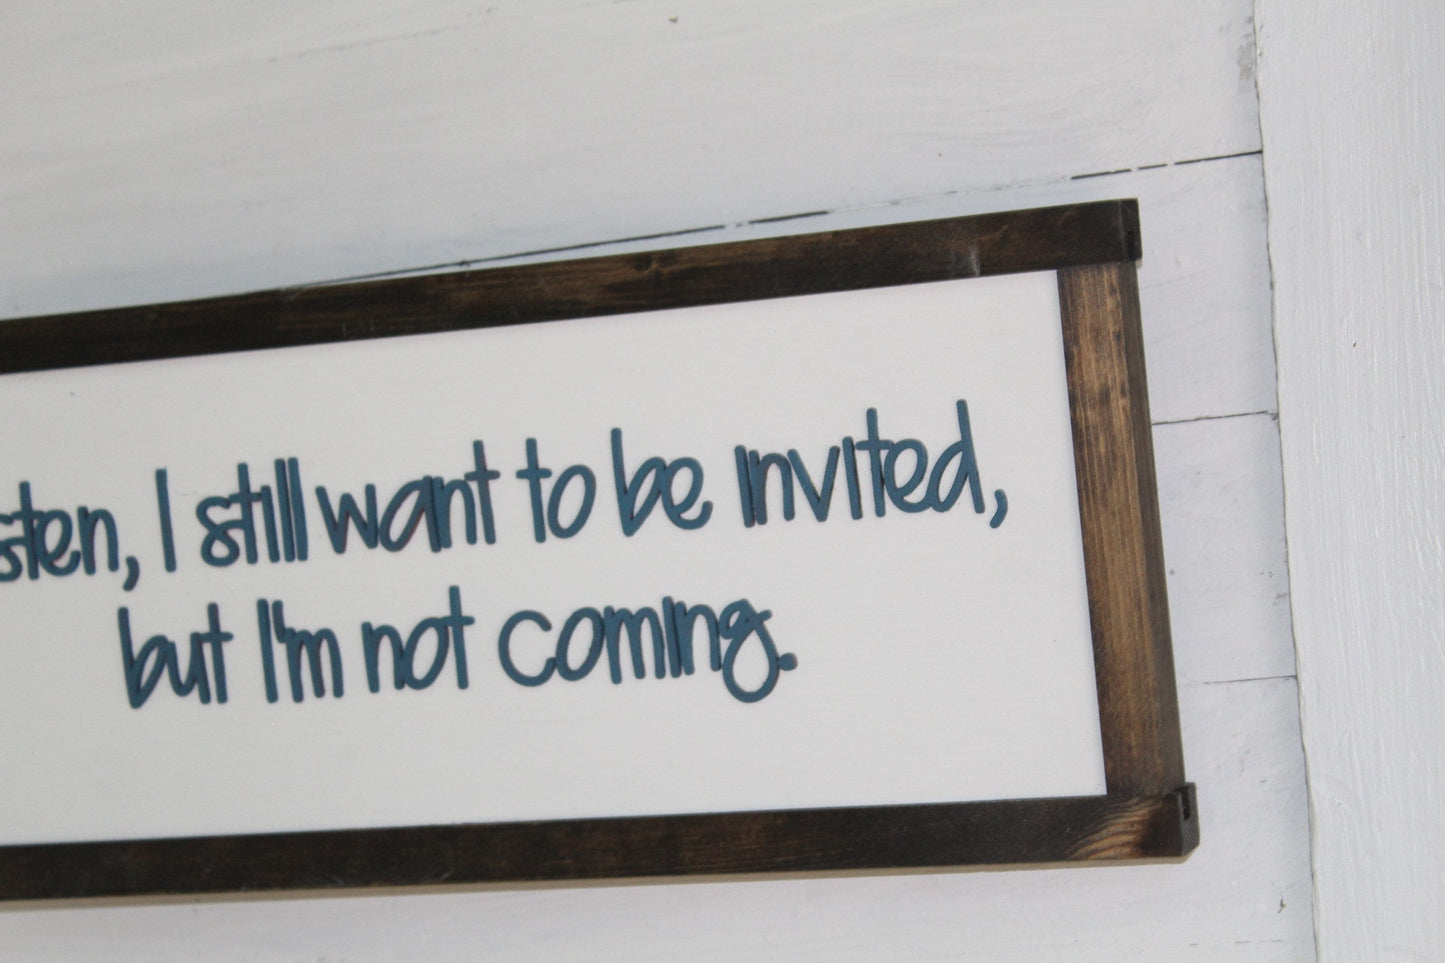 Introvert Wood Sign Joke Gag Gift Invite Me But I'm Not Coming Raised Text Rustic Sarcastic Decoration Wall Decor Hanging Snarky Homebody